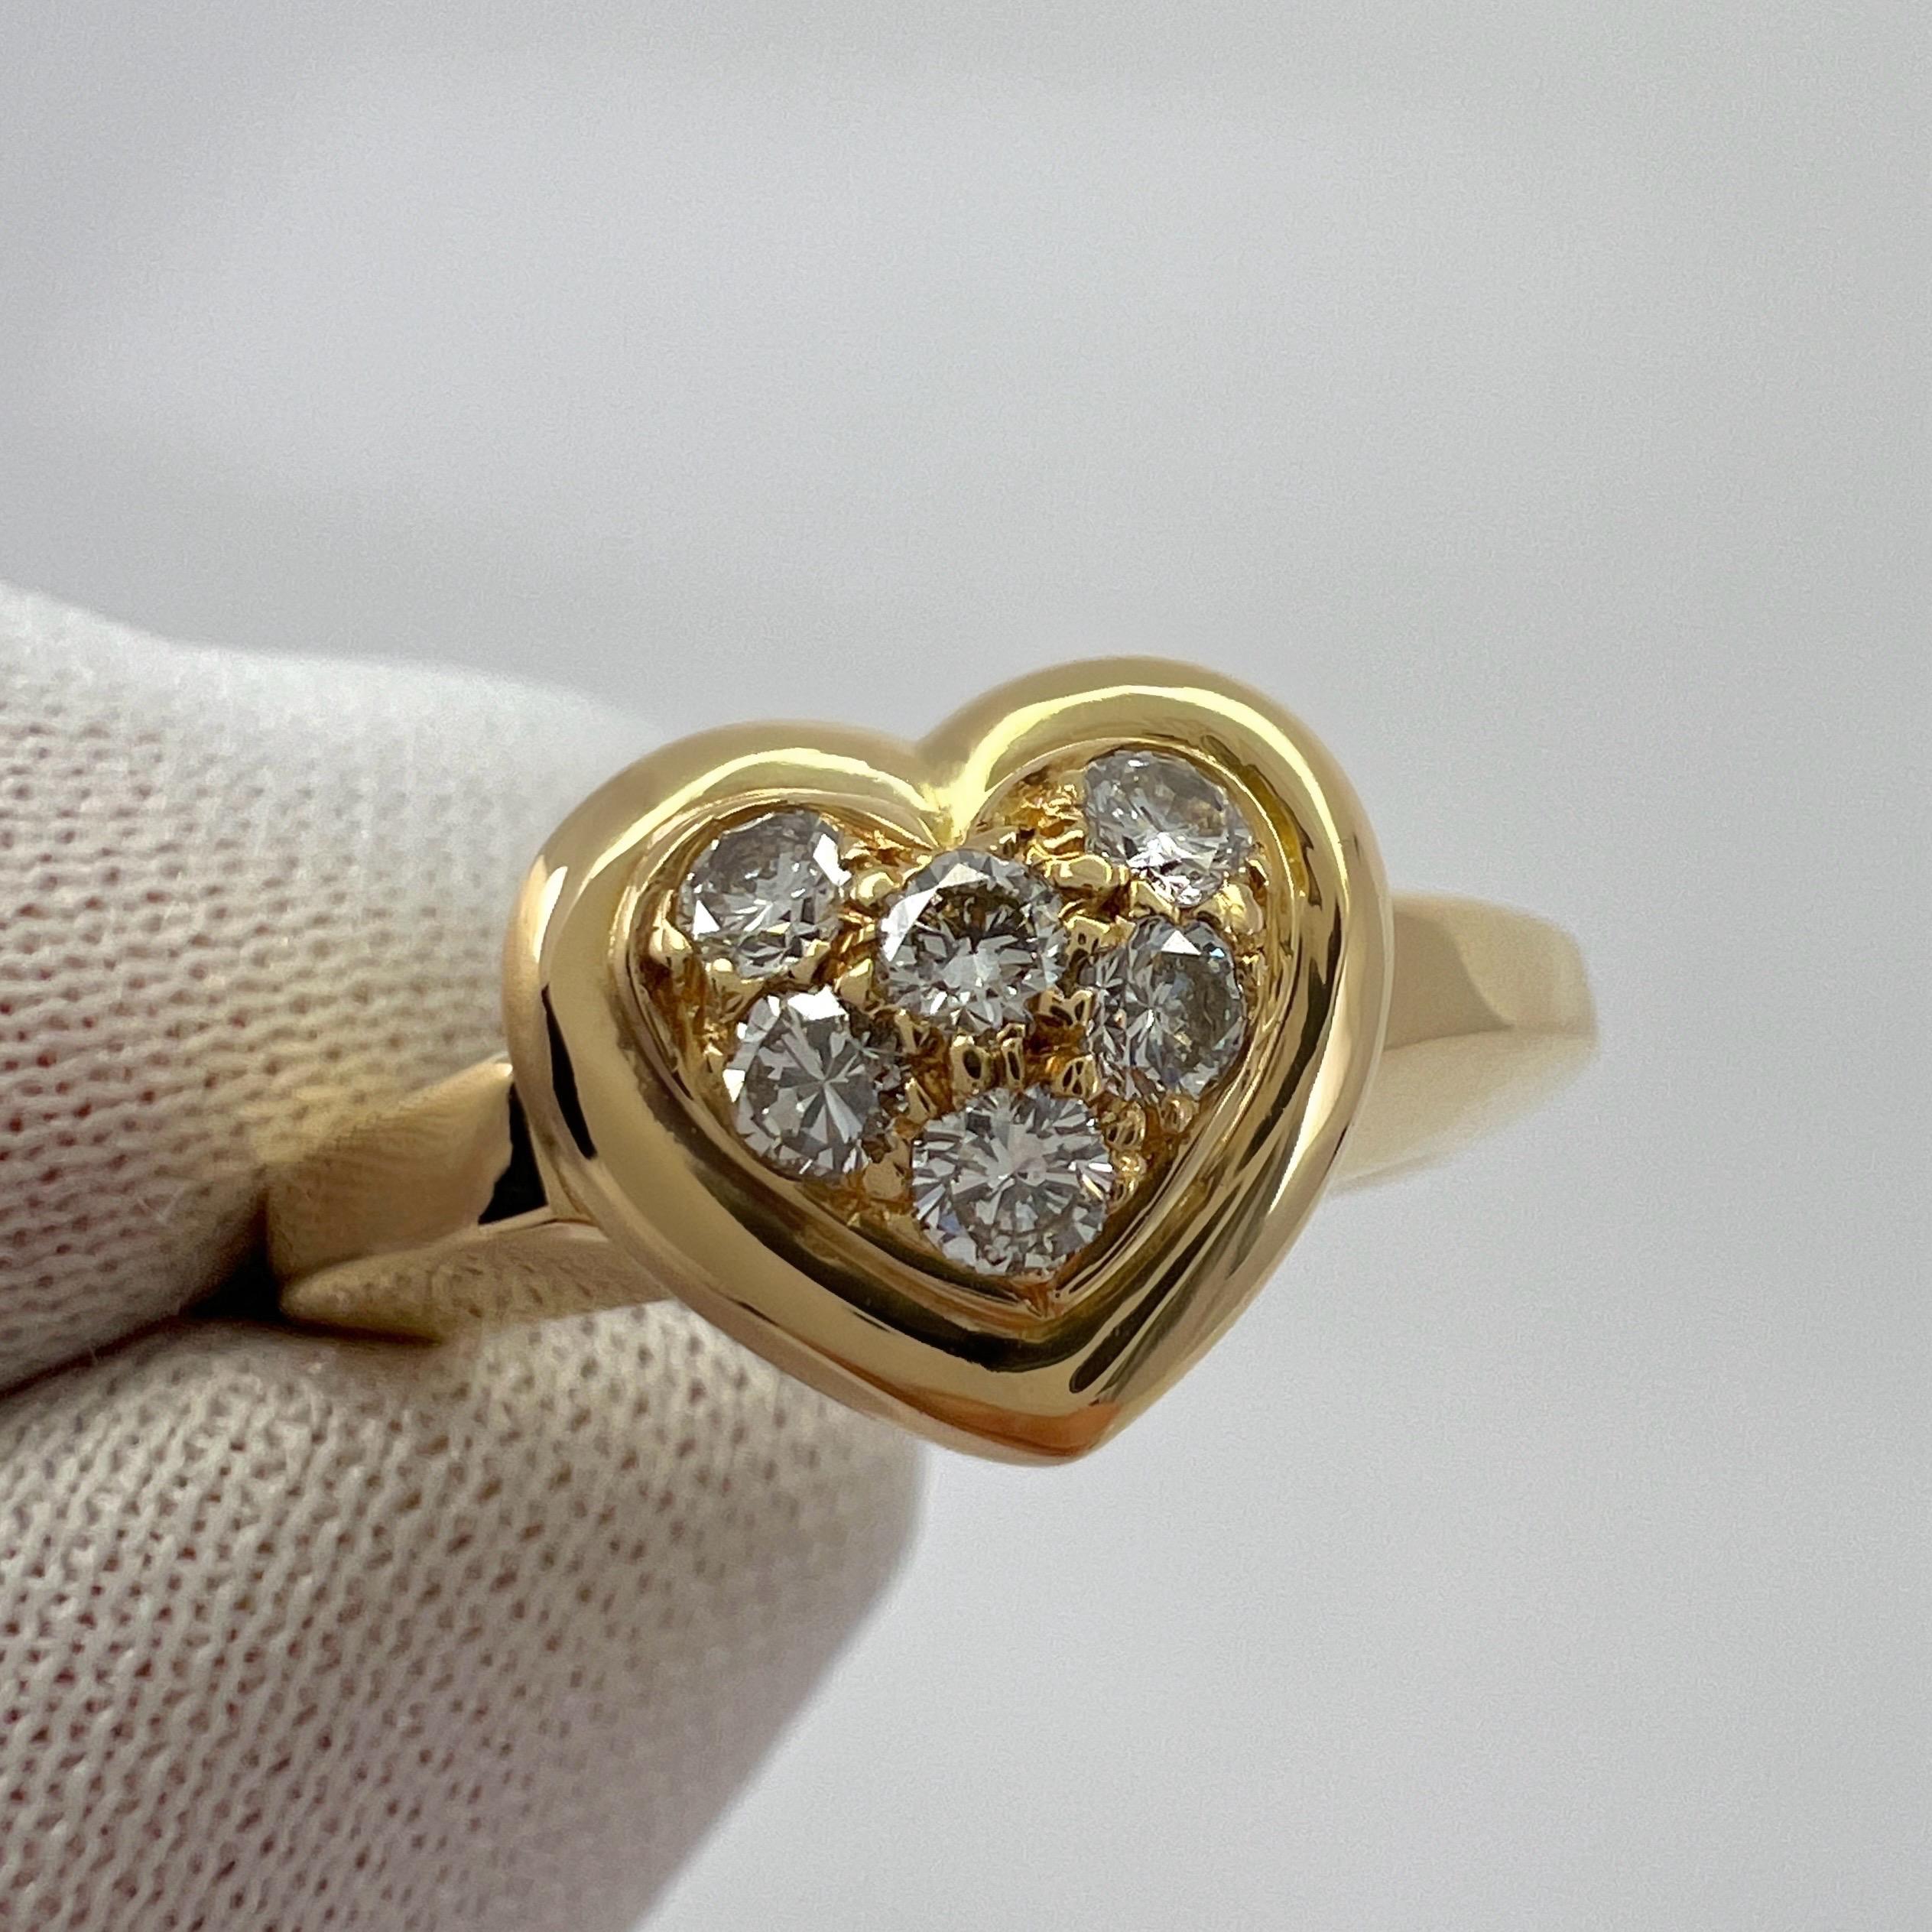 Rare Vintage Van Cleef & Arpels 18k Yellow Gold Diamond Heart Ring And Pendant In Excellent Condition For Sale In Birmingham, GB